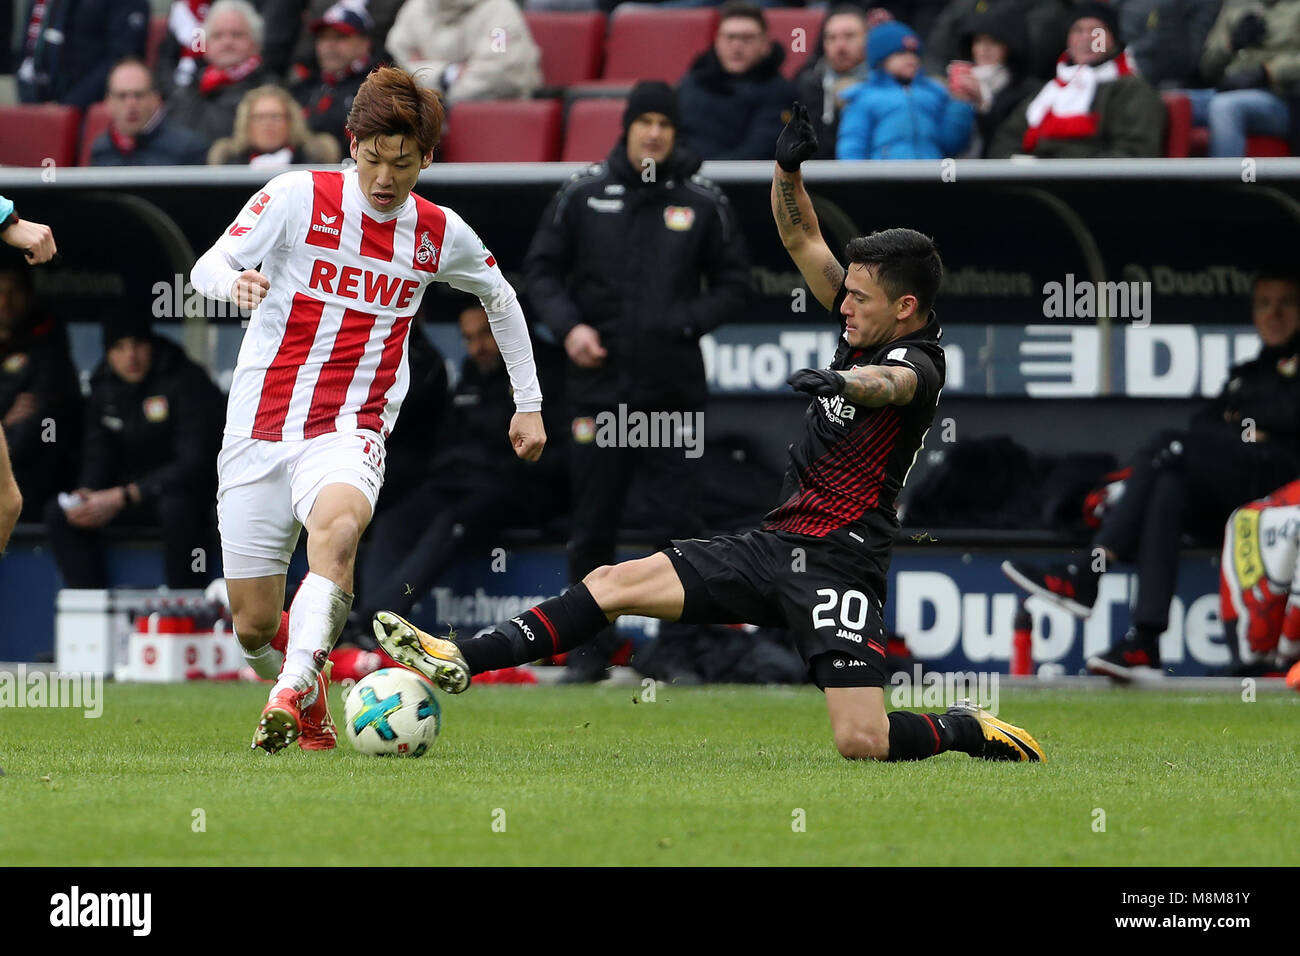 Cologne, Germany. 18th Mar, 2018. Charles Aranguiz (R) of Leverkusen vies with Yuya Osako of Cologne during the Bundesliga soccer match between Cologne and Leverkusen in Cologne, Germany, March 18, 2018. Cologne won 2-0. Credit: Ulrich Hufnagel/Xinhua/Alamy Live News Stock Photo